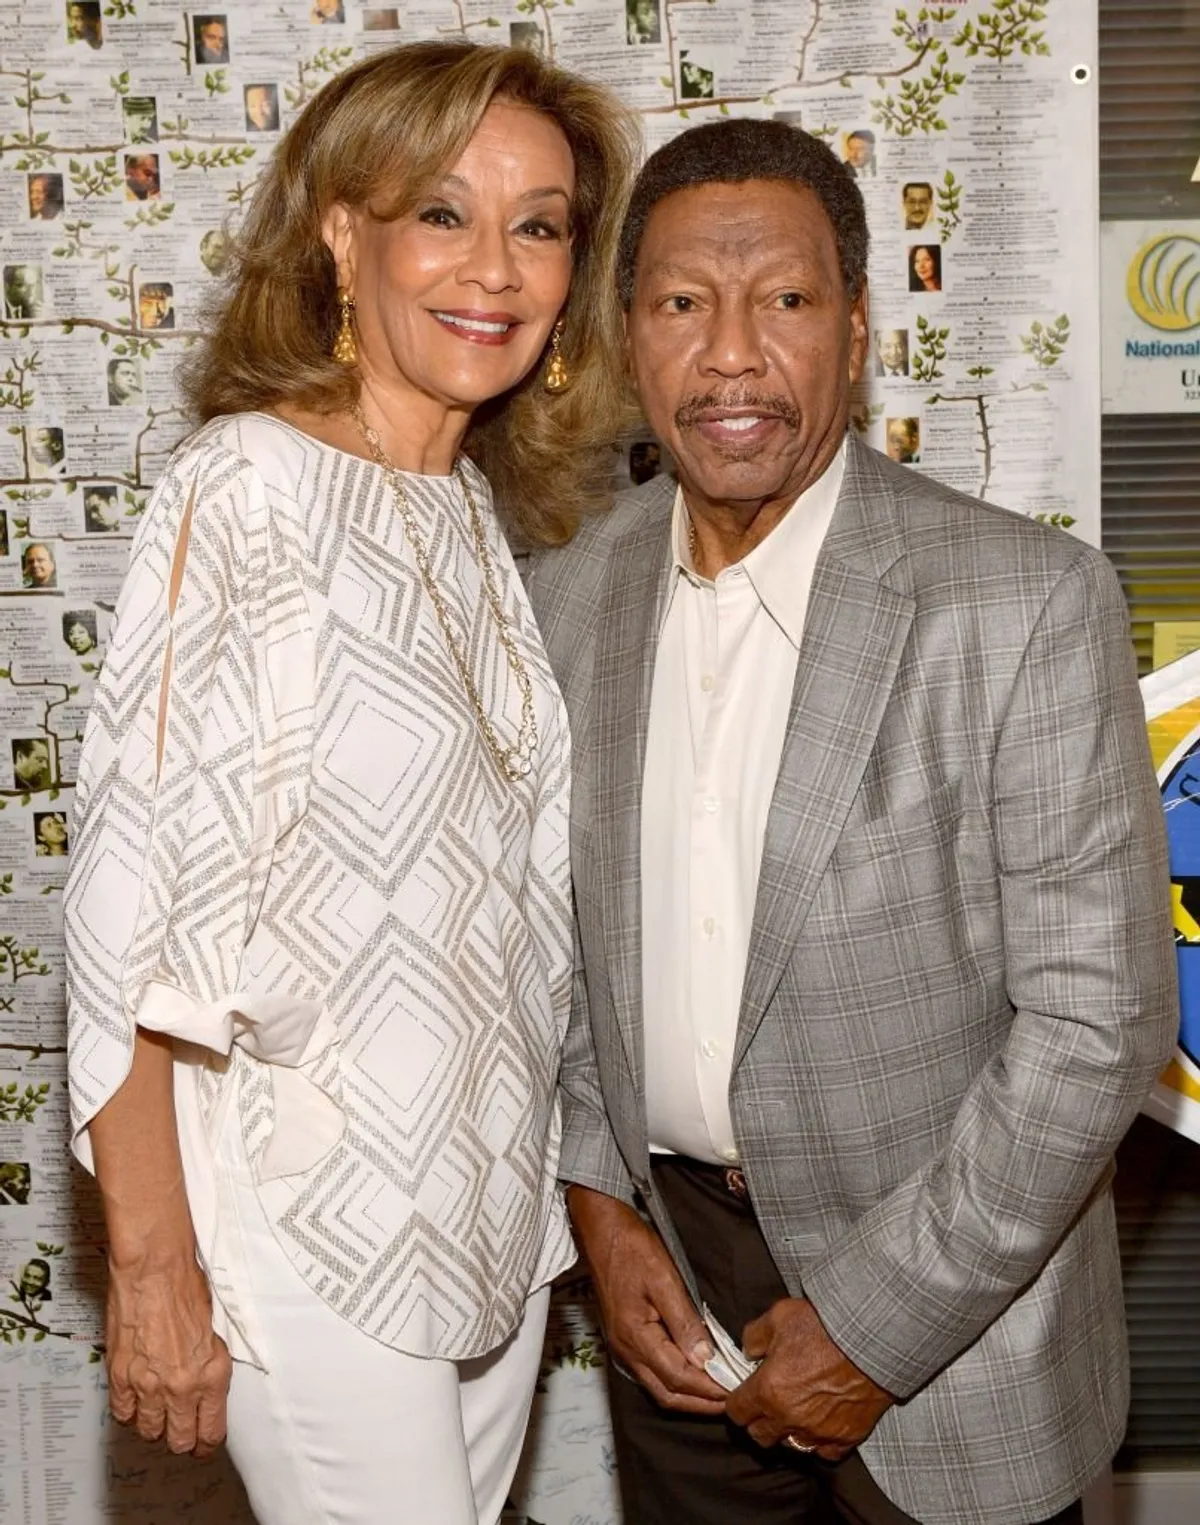  Marilyn McCoo and Billy Davis Jr. attend the 3rd annual California Jazz & Blues Museum Hall of Fame Induction Ceremony & Concert on September 16, 2020 in California. | Photo: Getty Images